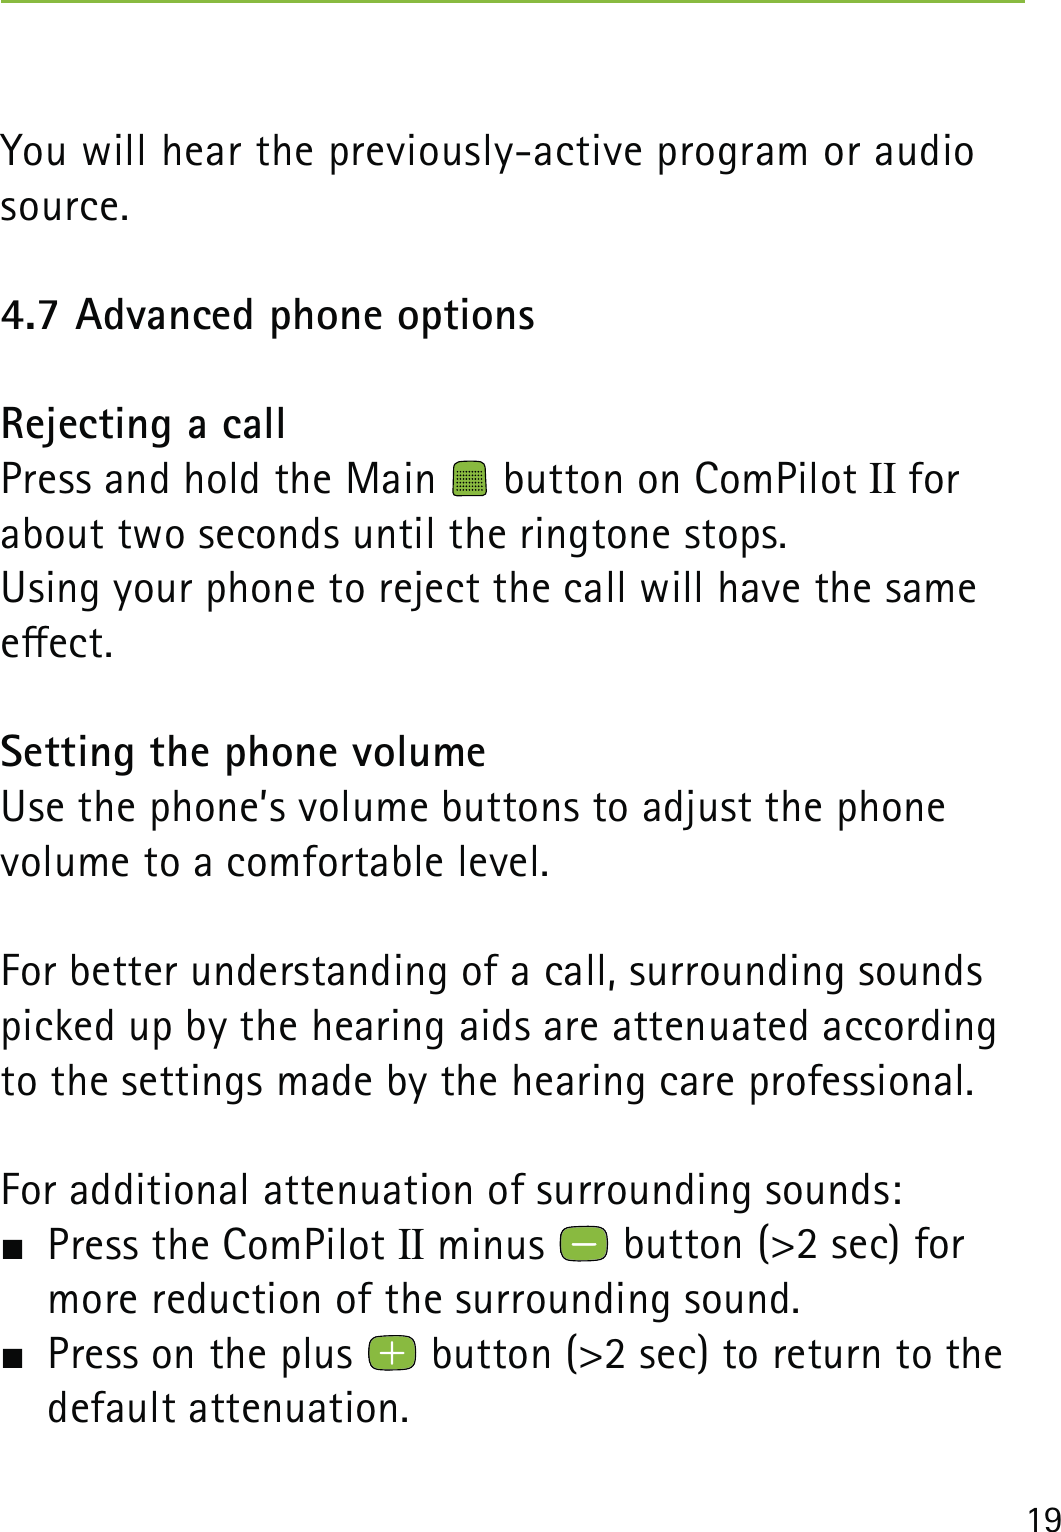 19You will hear the previously-active program or audio source.4.7 Advanced phone optionsRejecting a callPress and hold the Main   button on ComPilot II for about two seconds until the ringtone stops. Using your phone to reject the call will have the same eect. Setting the phone volumeUse the phone’s volume buttons to adjust the phone  volume to a comfortable level.For better understanding of a call, surrounding sounds picked up by the hearing aids are attenuated according to the settings made by the hearing care professional.For additional attenuation of surrounding sounds:  Press the ComPilot II minus   button (&gt;2 sec) for more reduction of the surrounding sound.  Press on the plus   button (&gt;2 sec) to return to the  default attenuation.